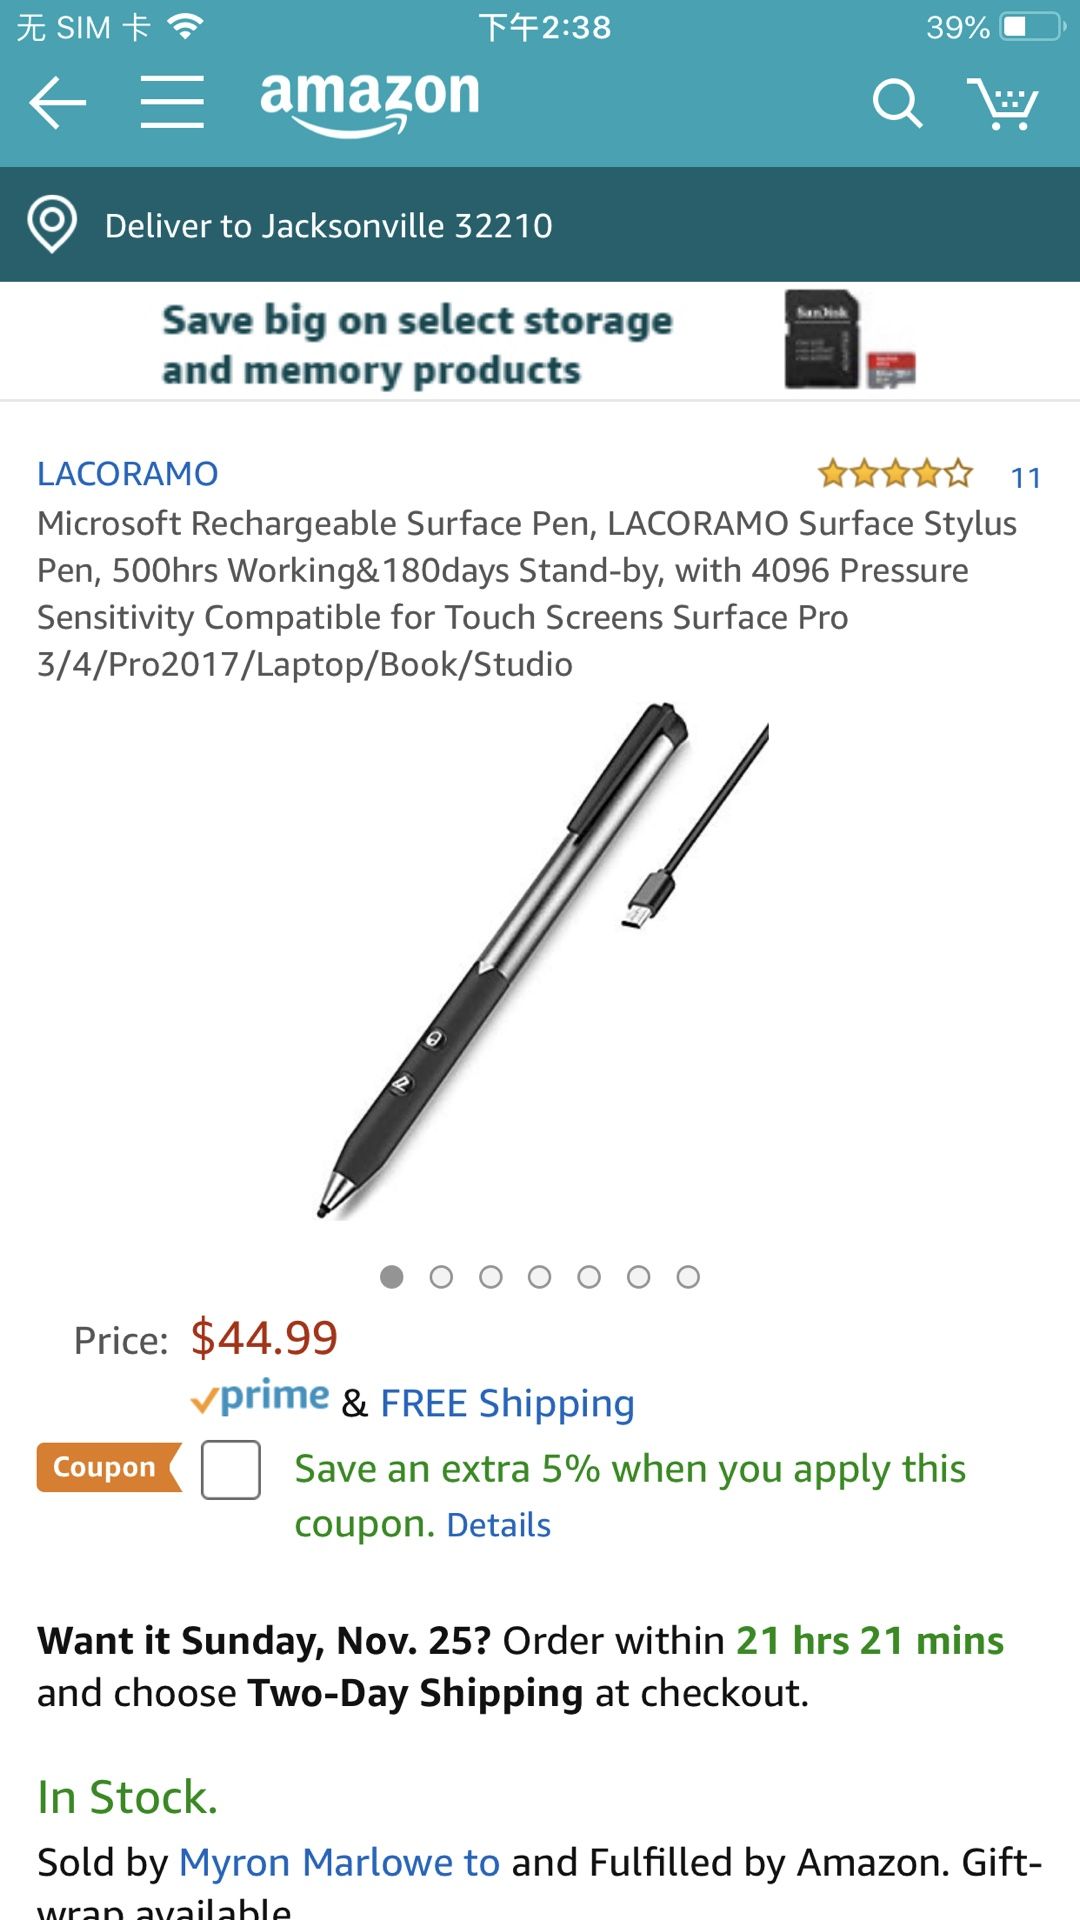 Brand new Microsoft Rechargeable Surface Pen